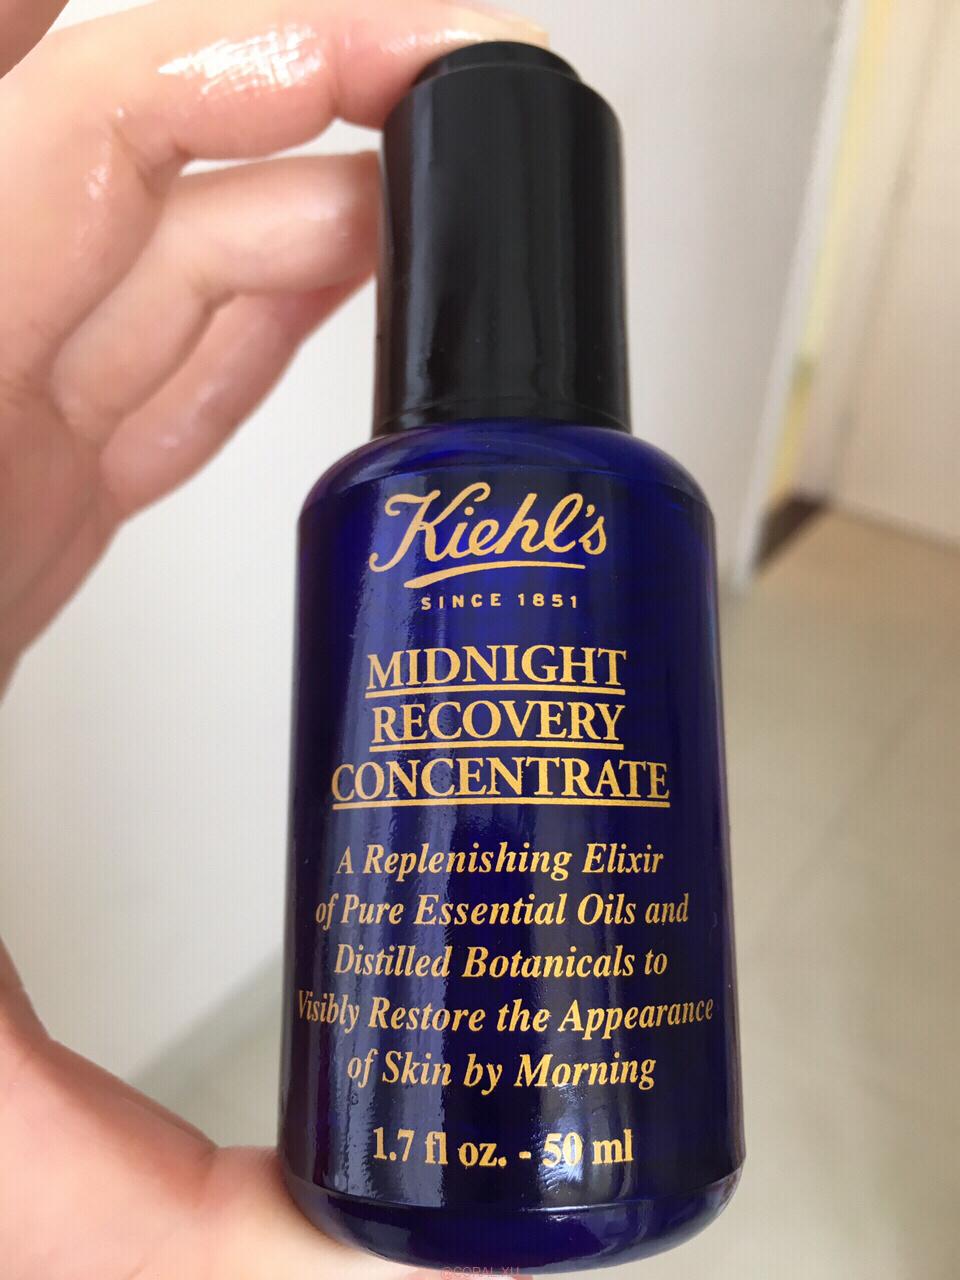 Kiehls Midnight Recovery Concentrate Face Oil Review - Kiehl’s Midnight Recovery Concentrate Face Oil Review